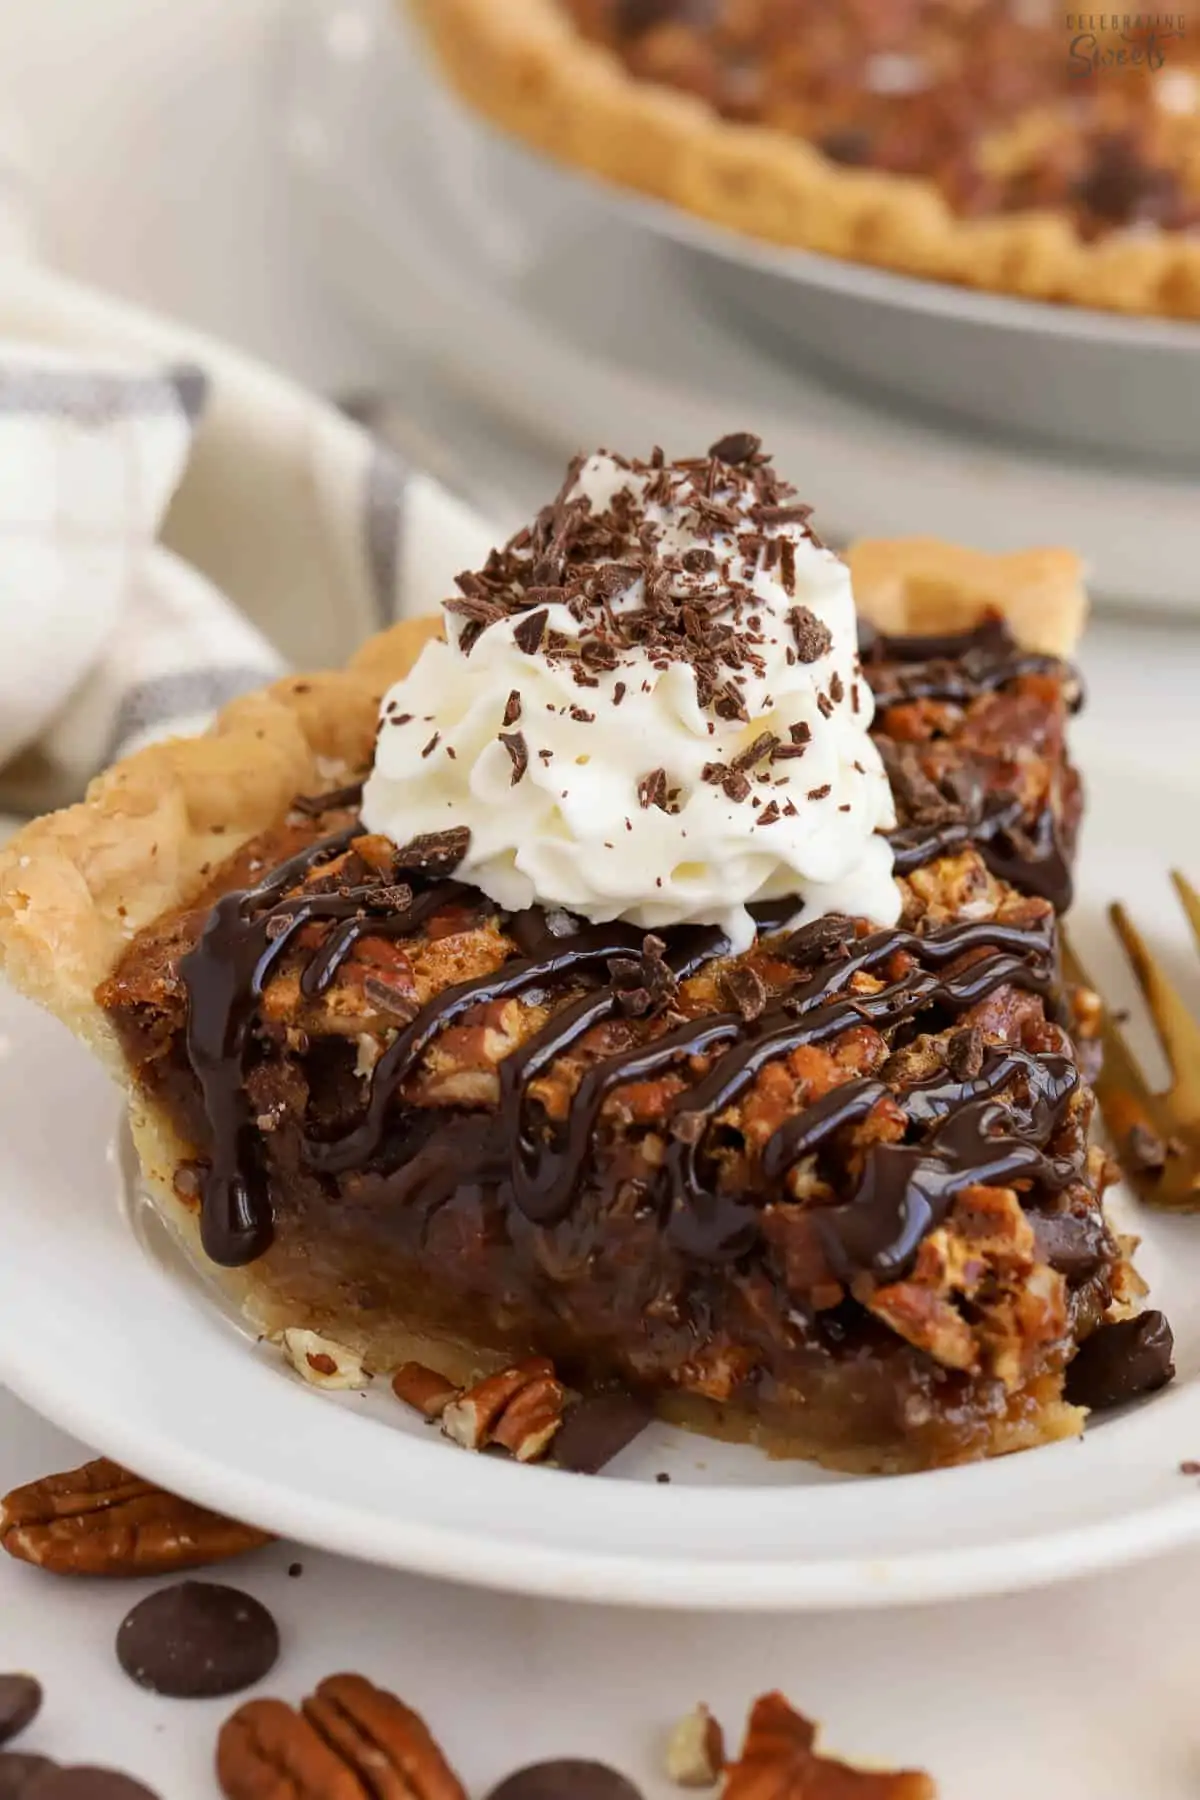 Slice of chocolate pecan pie on a white plate topped with whipped cream and chocolate sauce.